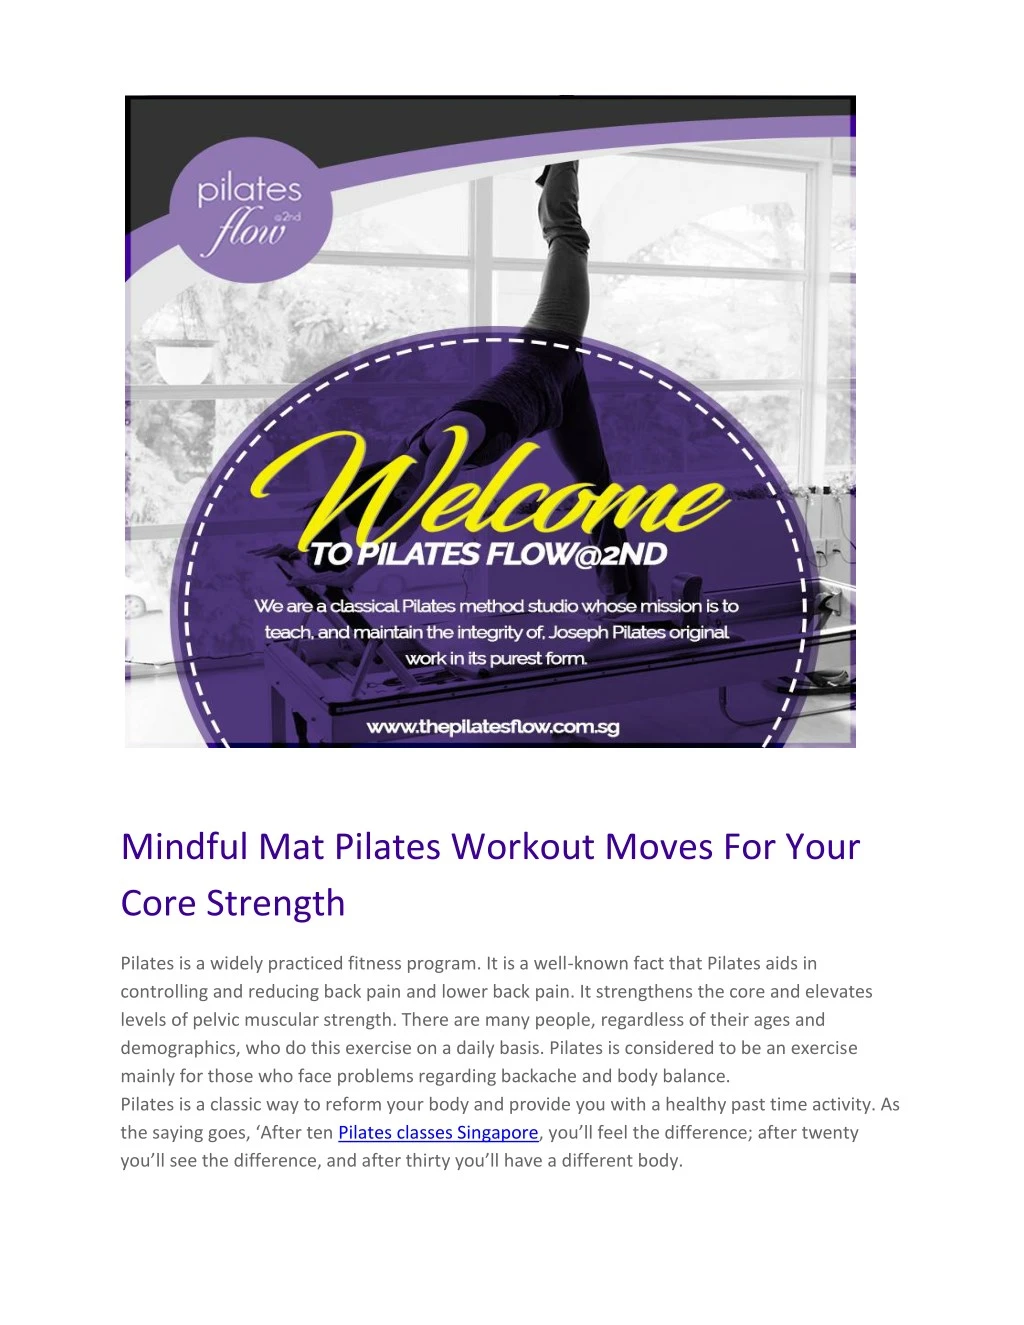 mindful mat pilates workout moves for your core